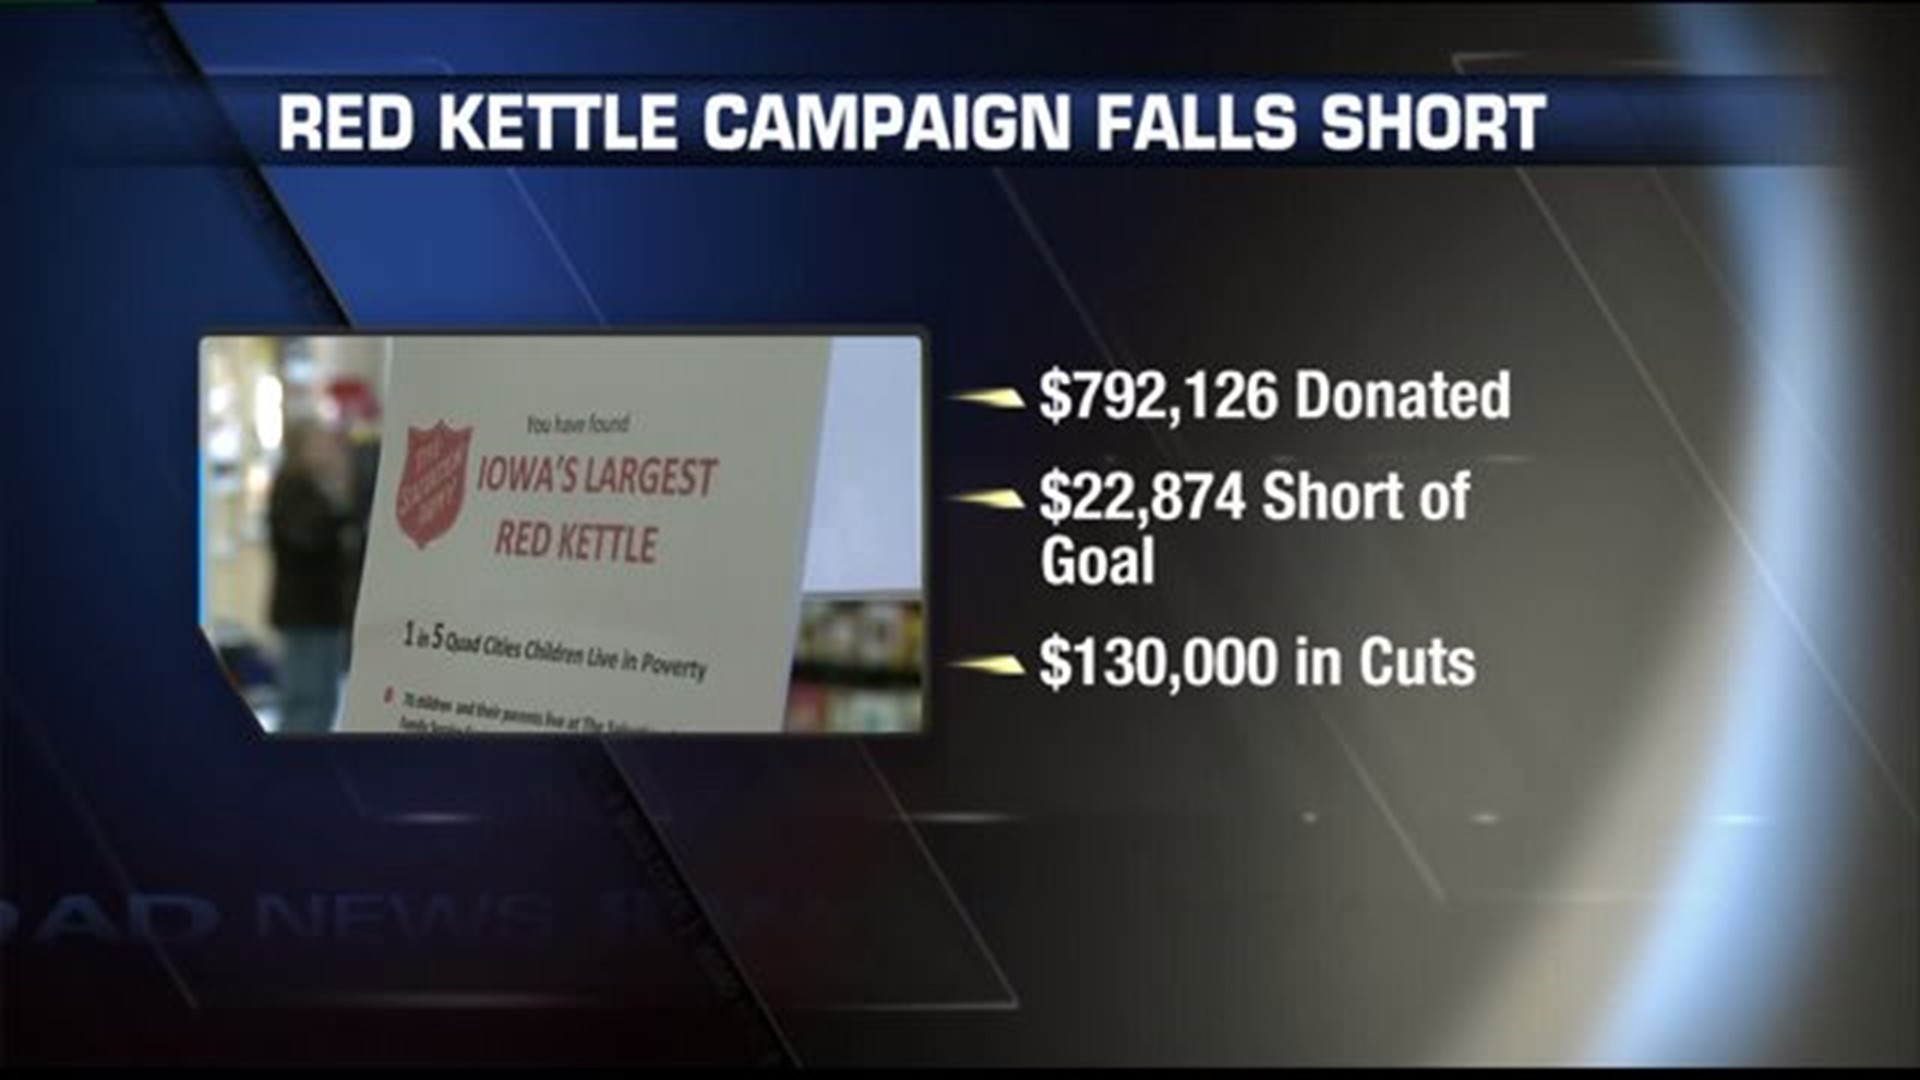 Red Kettle Campaign falls short of goal